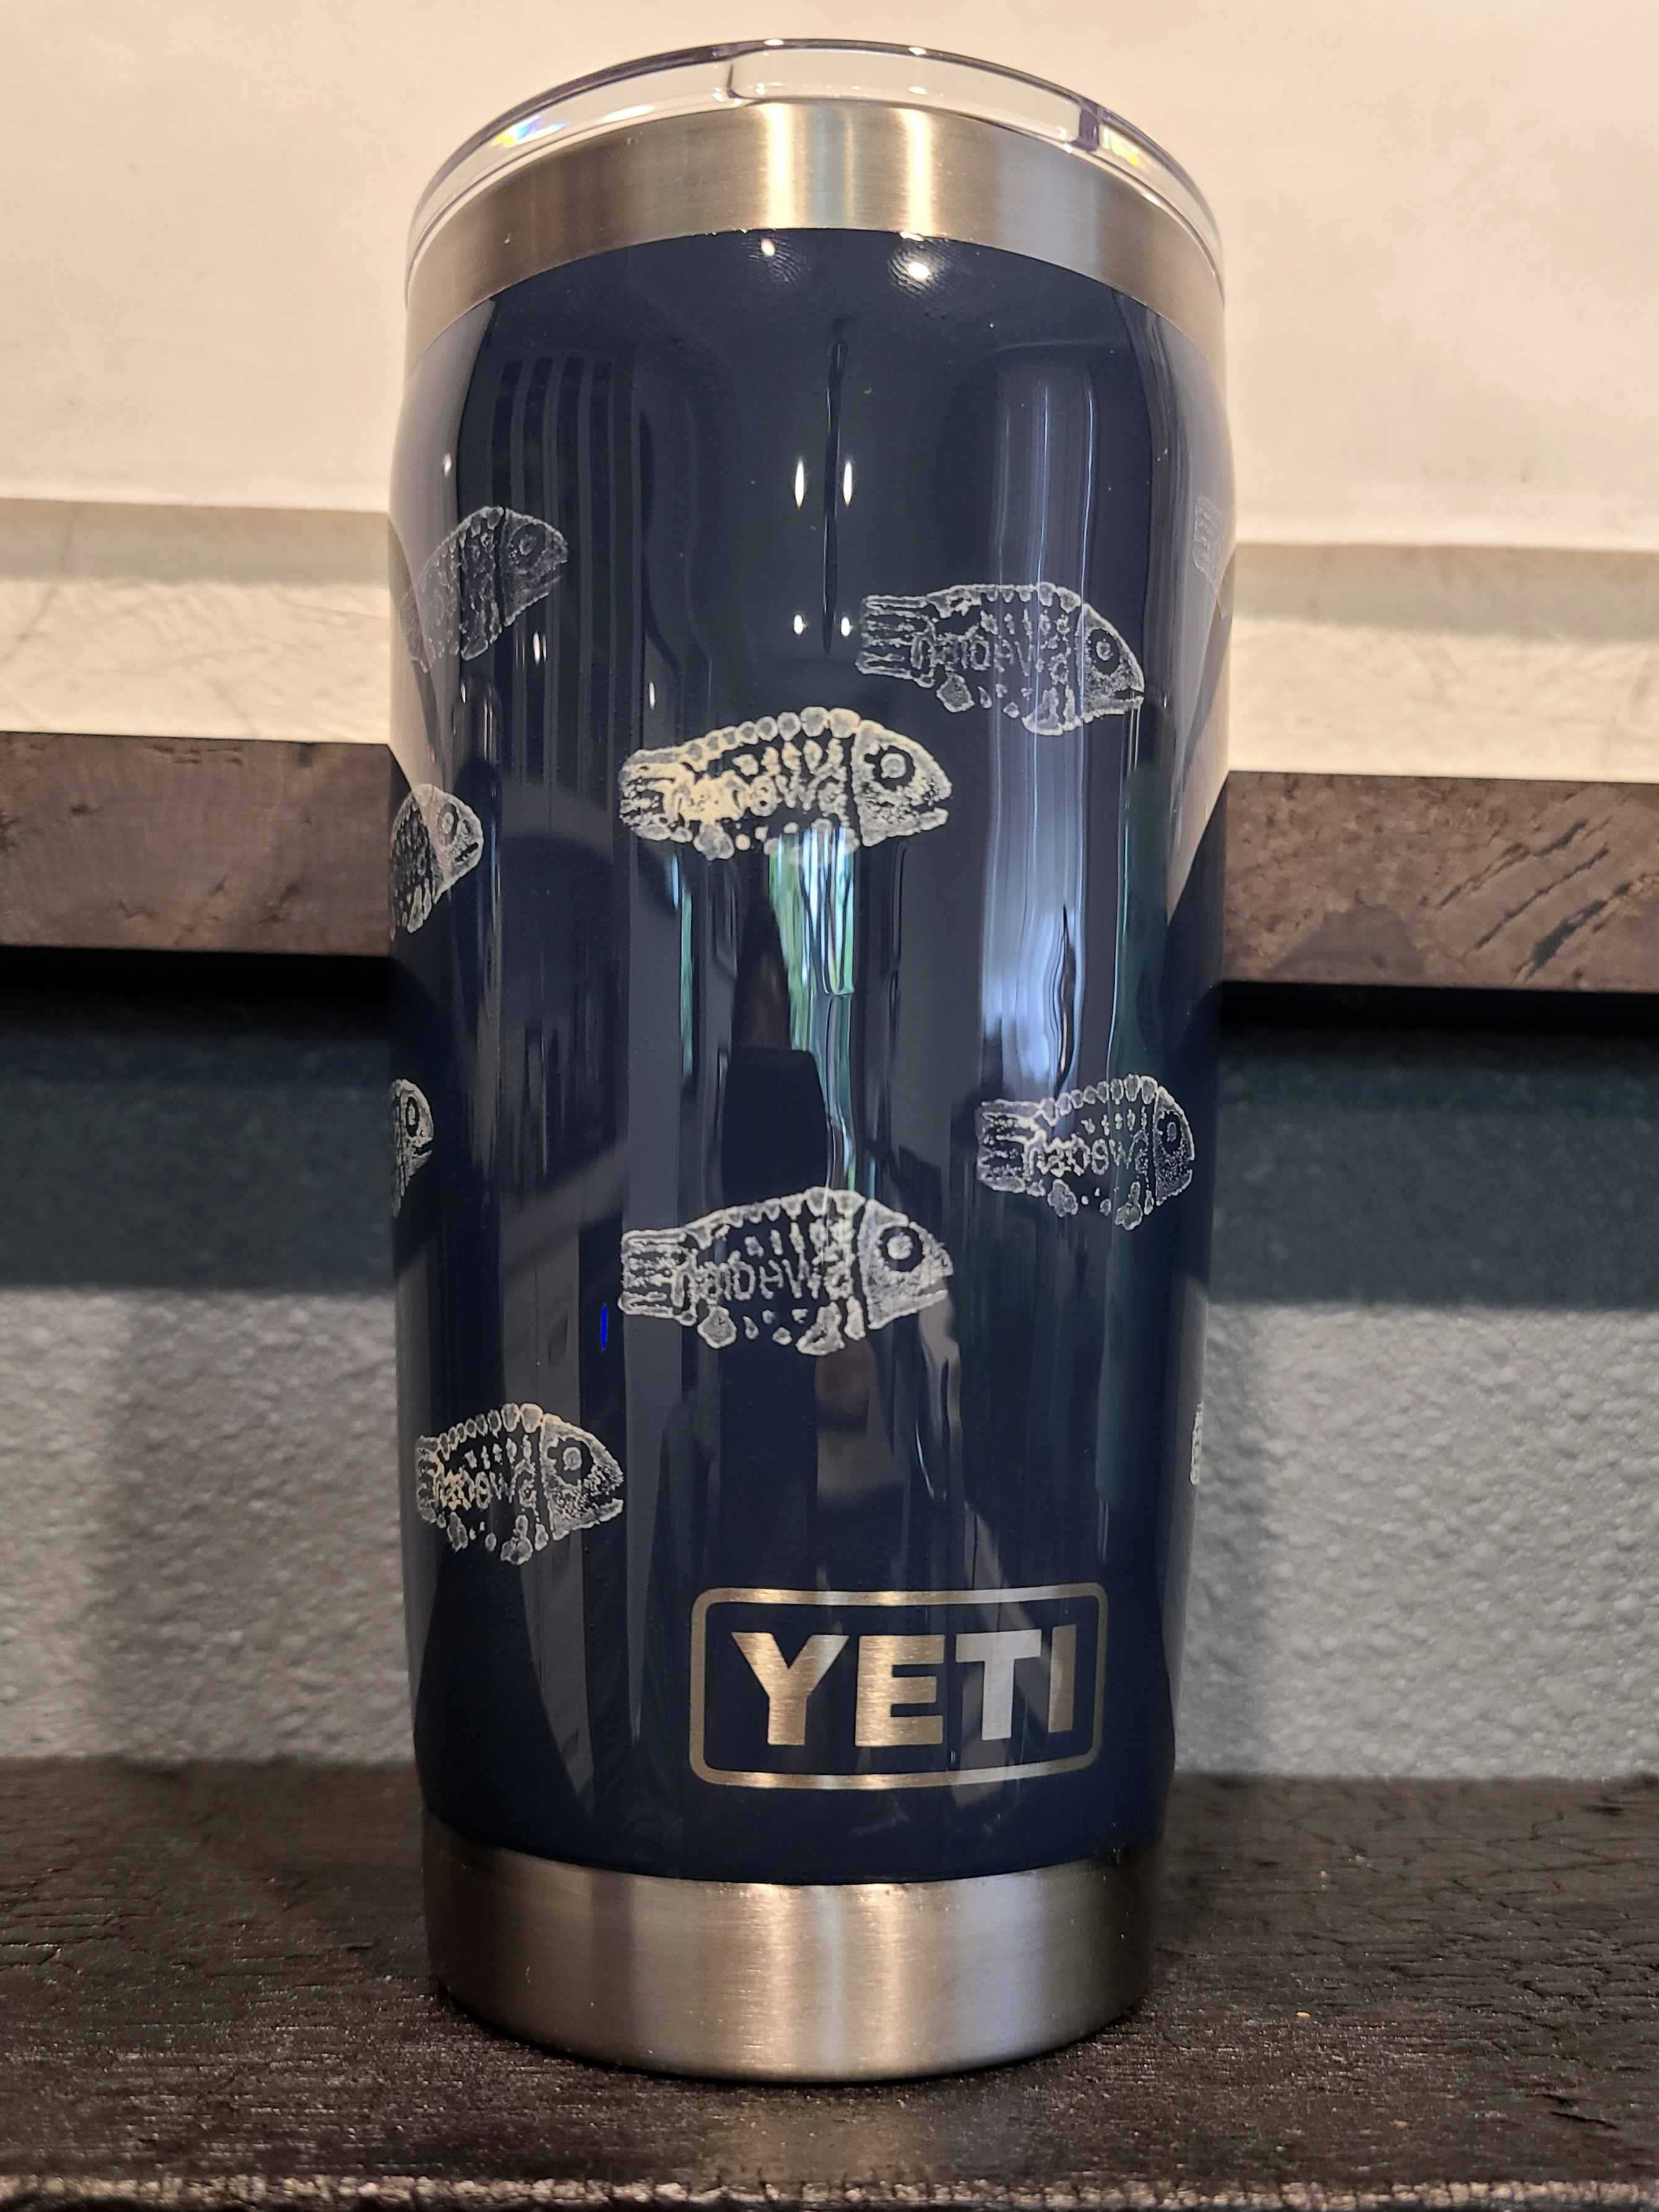 Resting Beach Face – Engraved Stainless Steel Tumbler, Yeti Style